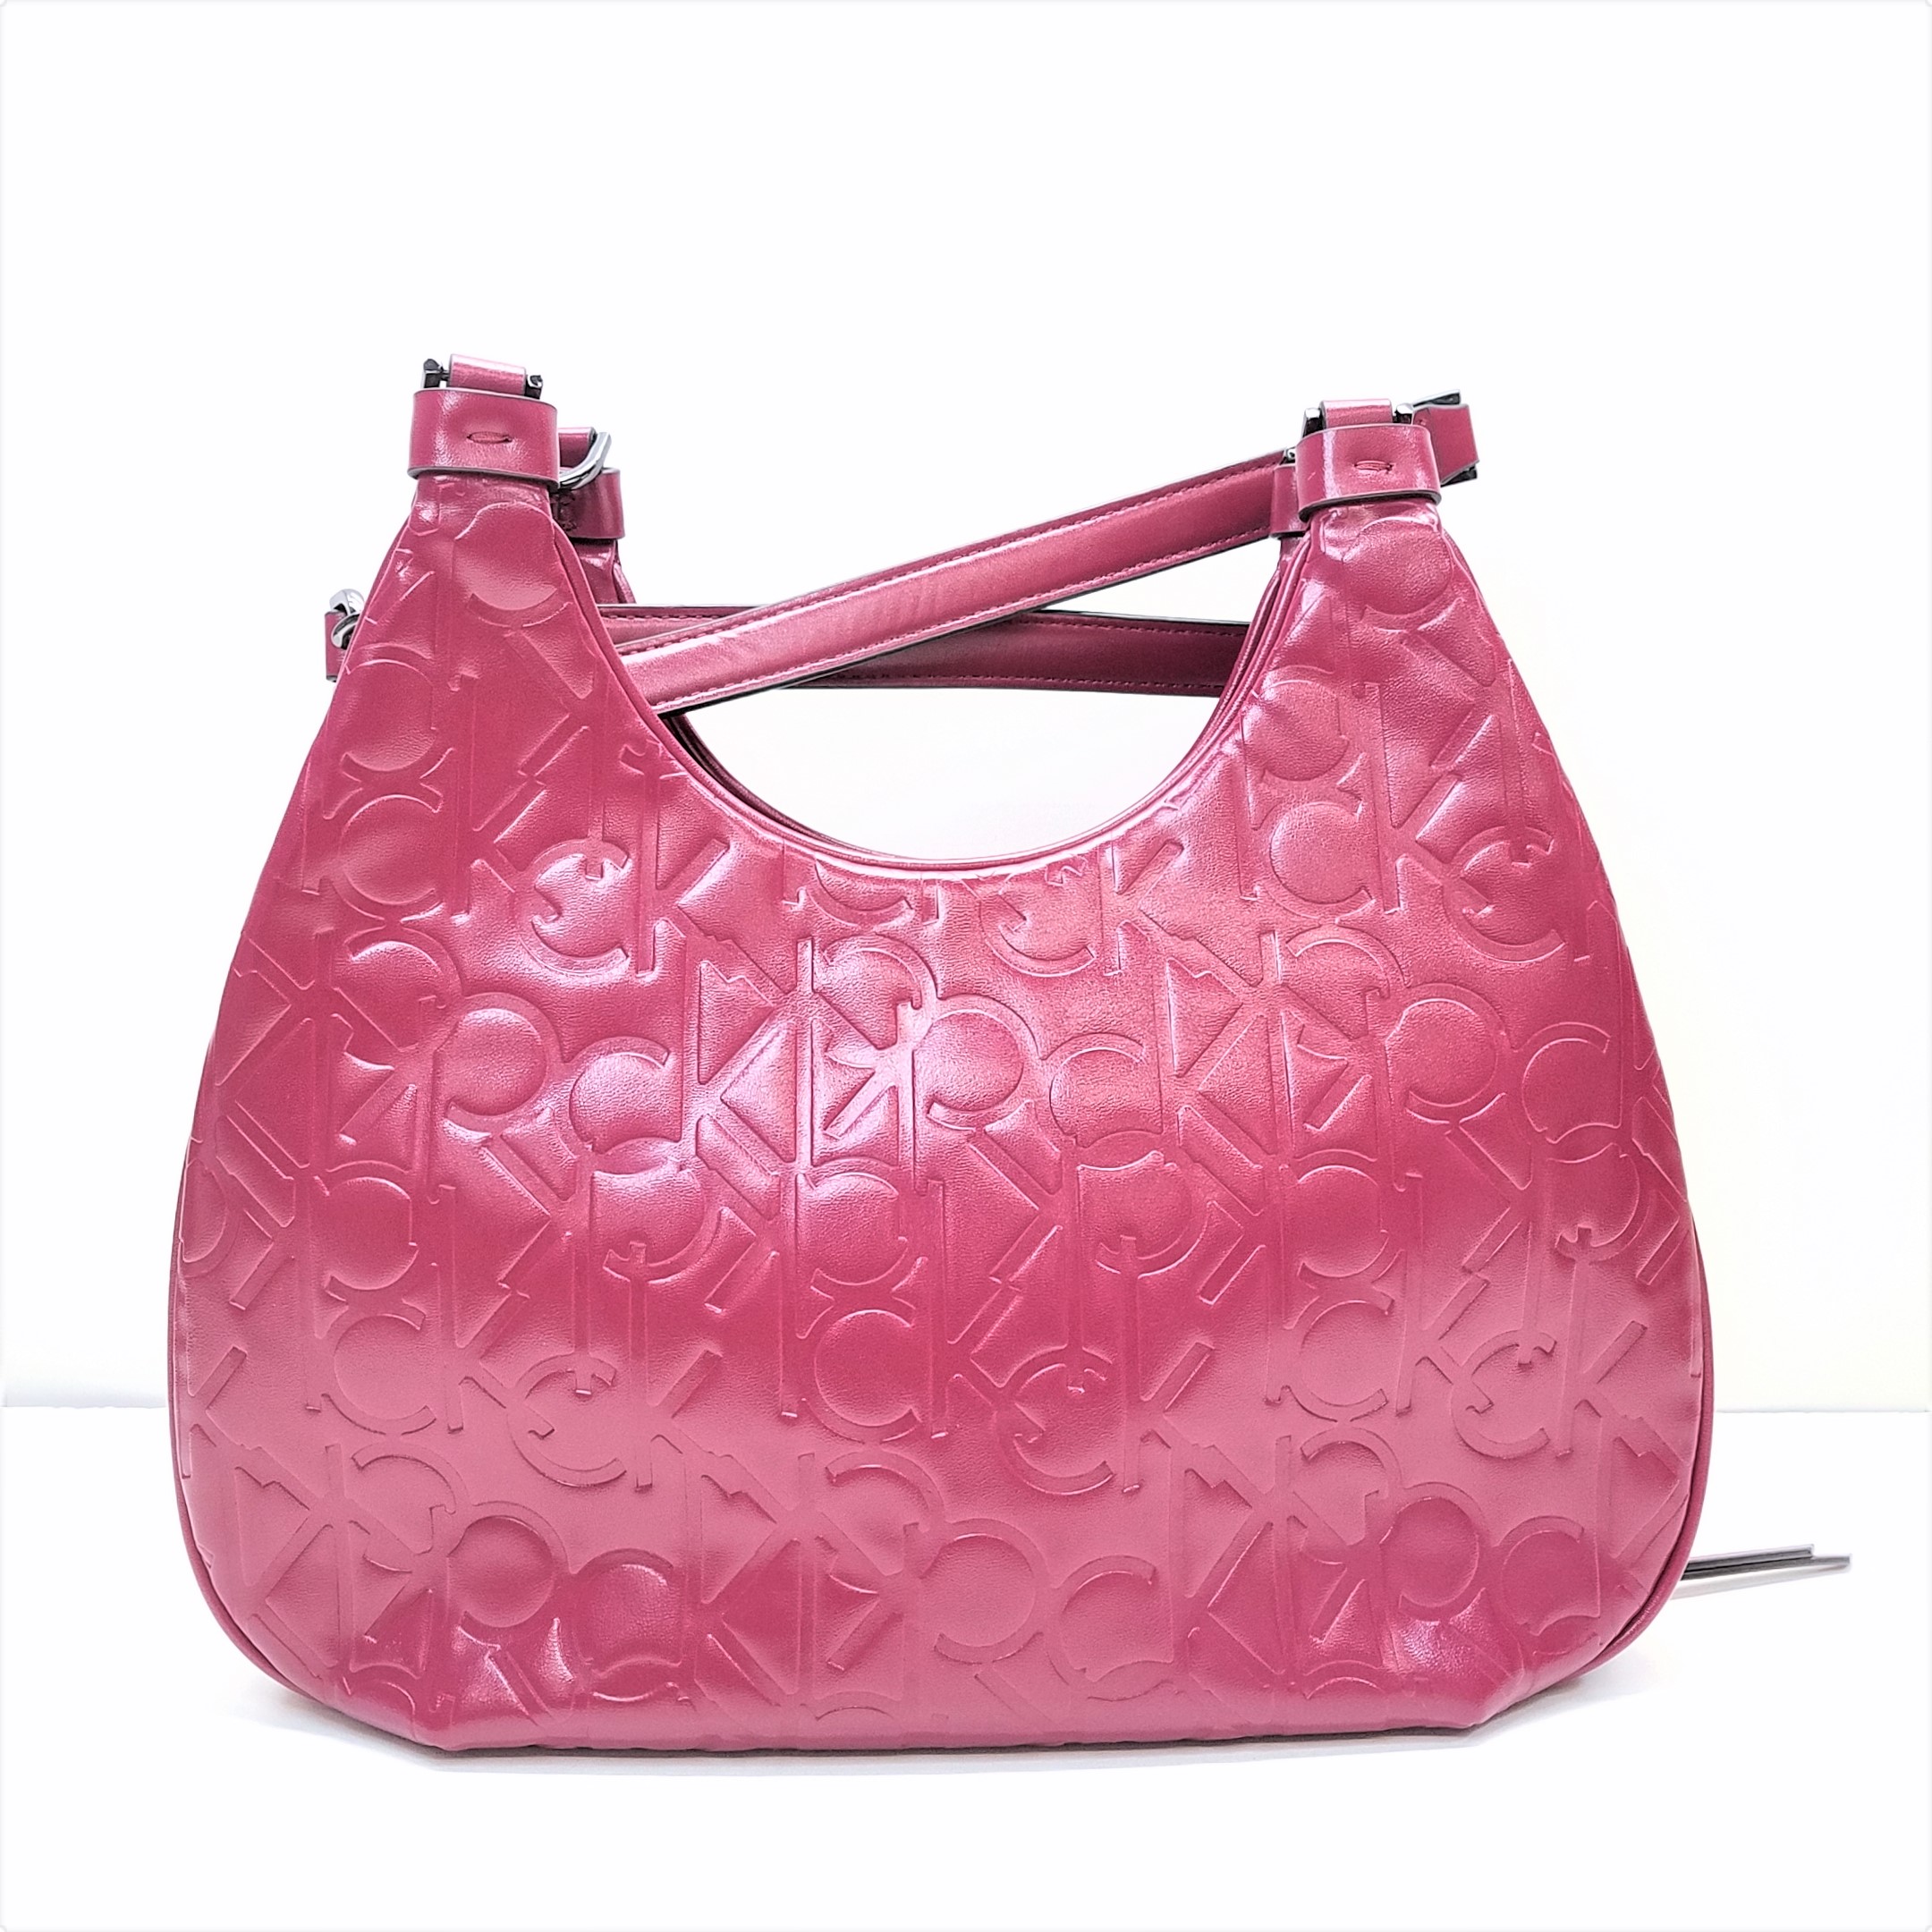 Calvin Klein - Red Quilted Crossbody Bag Unknown